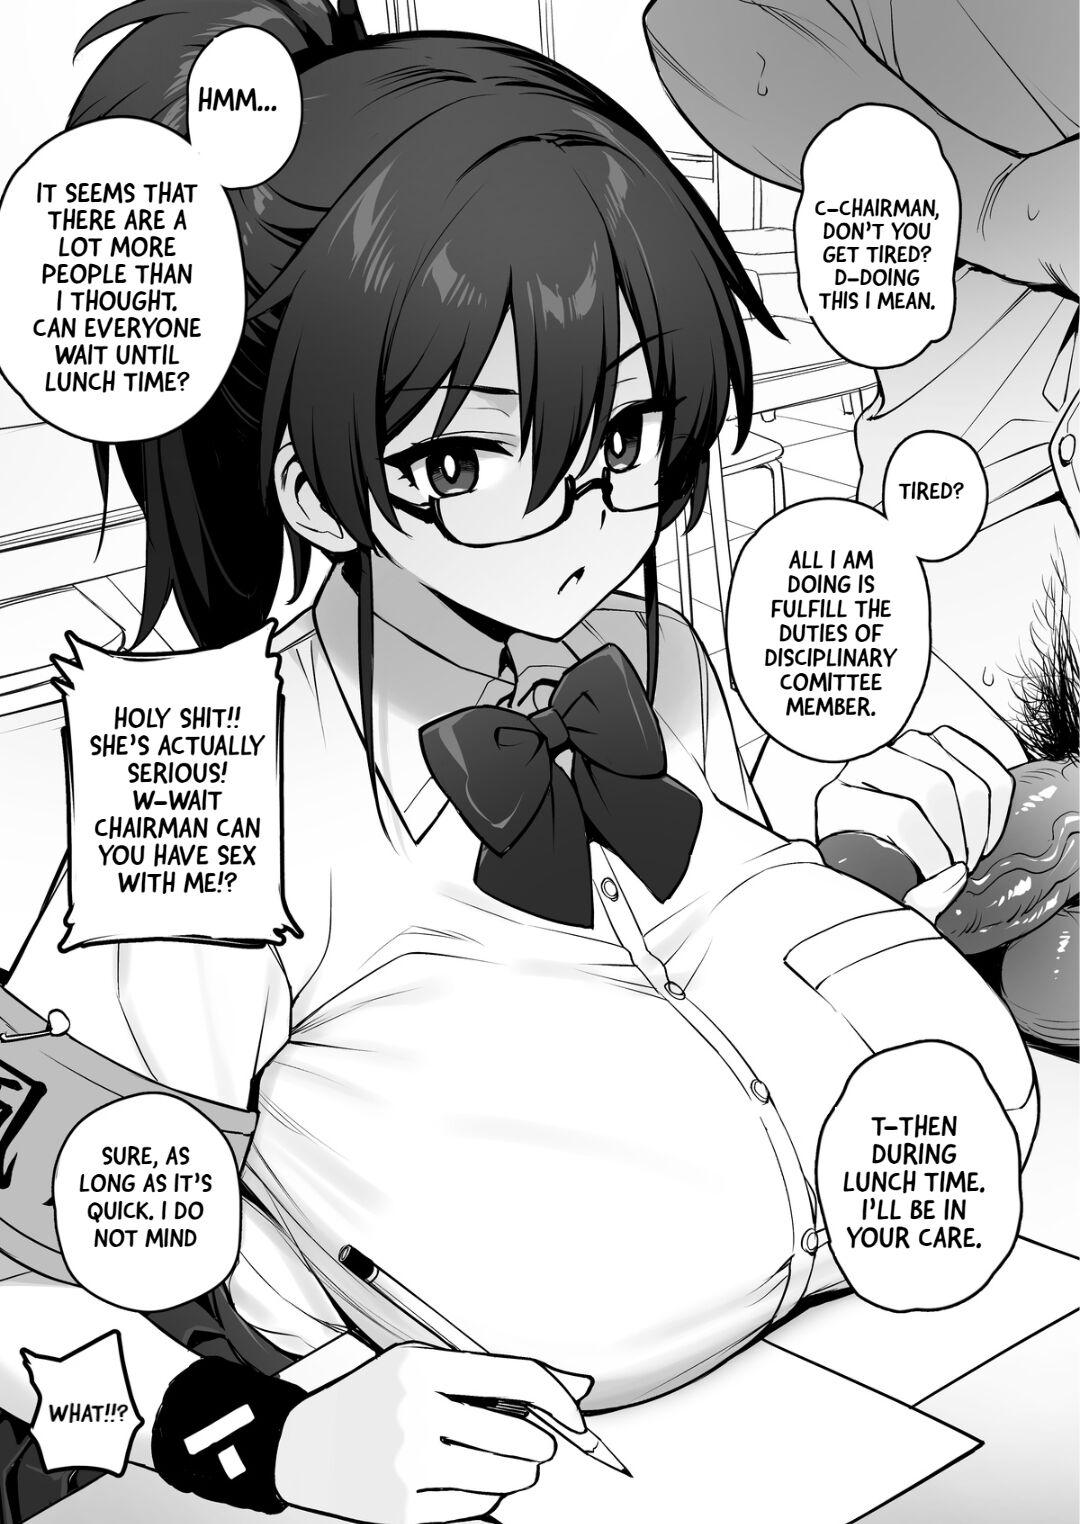 Cute Rumor Has It That The New Chairman of Disciplinary Committee Has Huge Breasts. Toy - Page 8